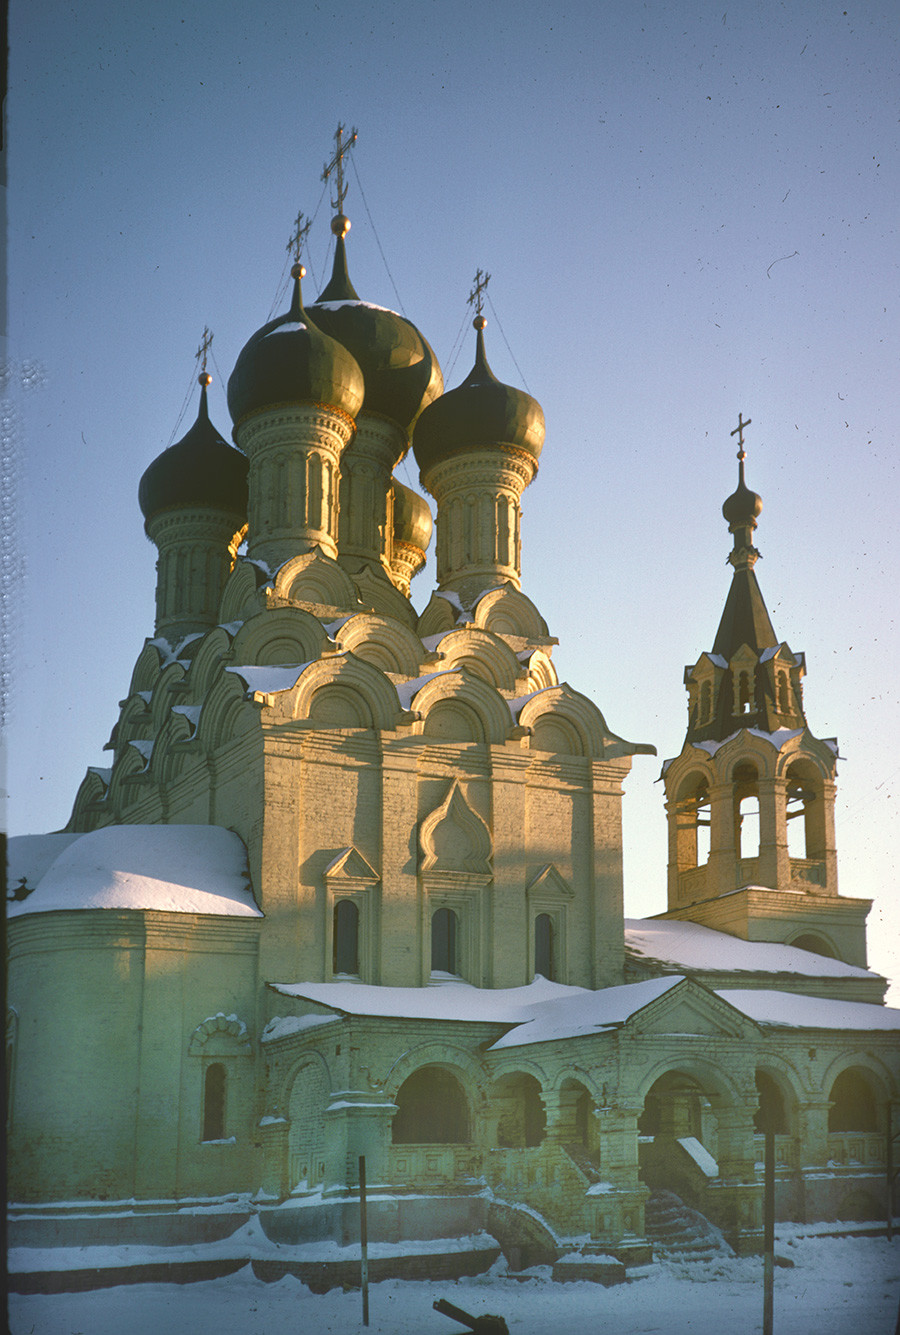 Church of the Dormition, northeast view. March 6, 1972